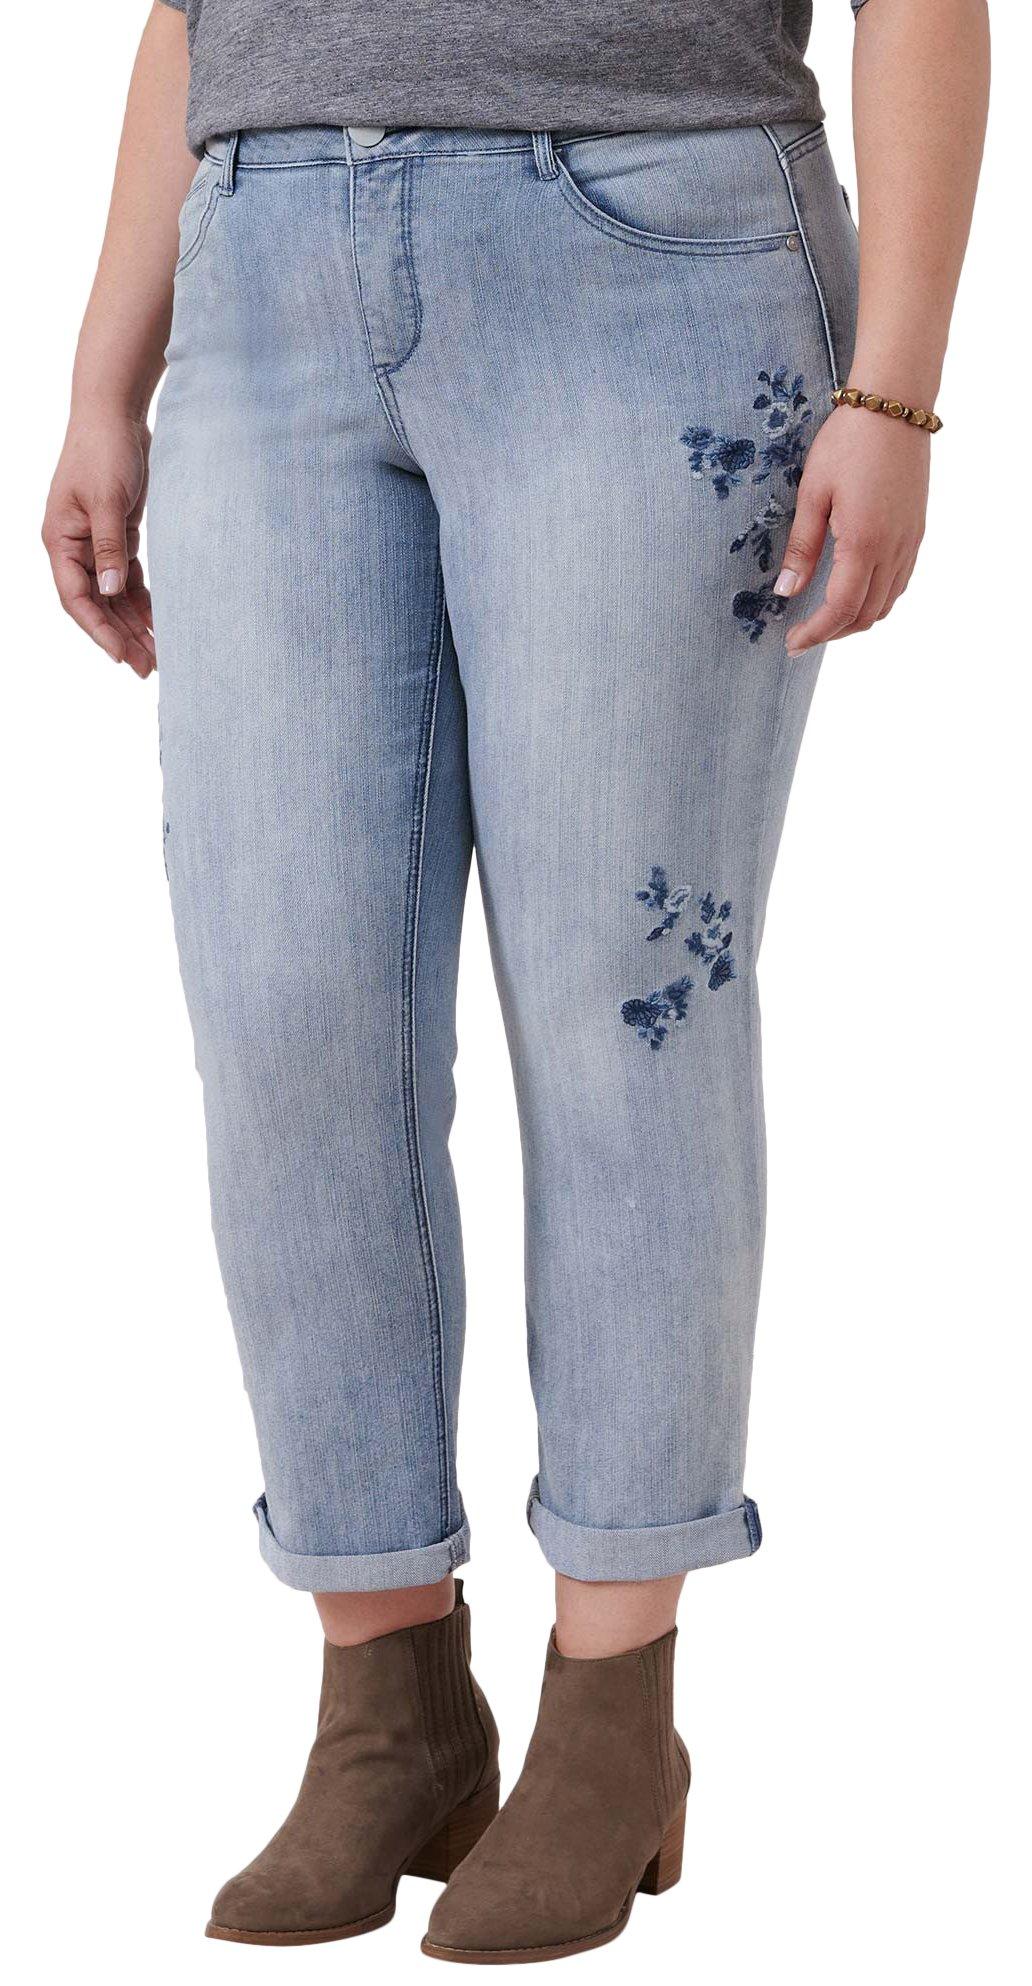 Plus Ab-Tech Floral Embroidery Girlfriend Jeans